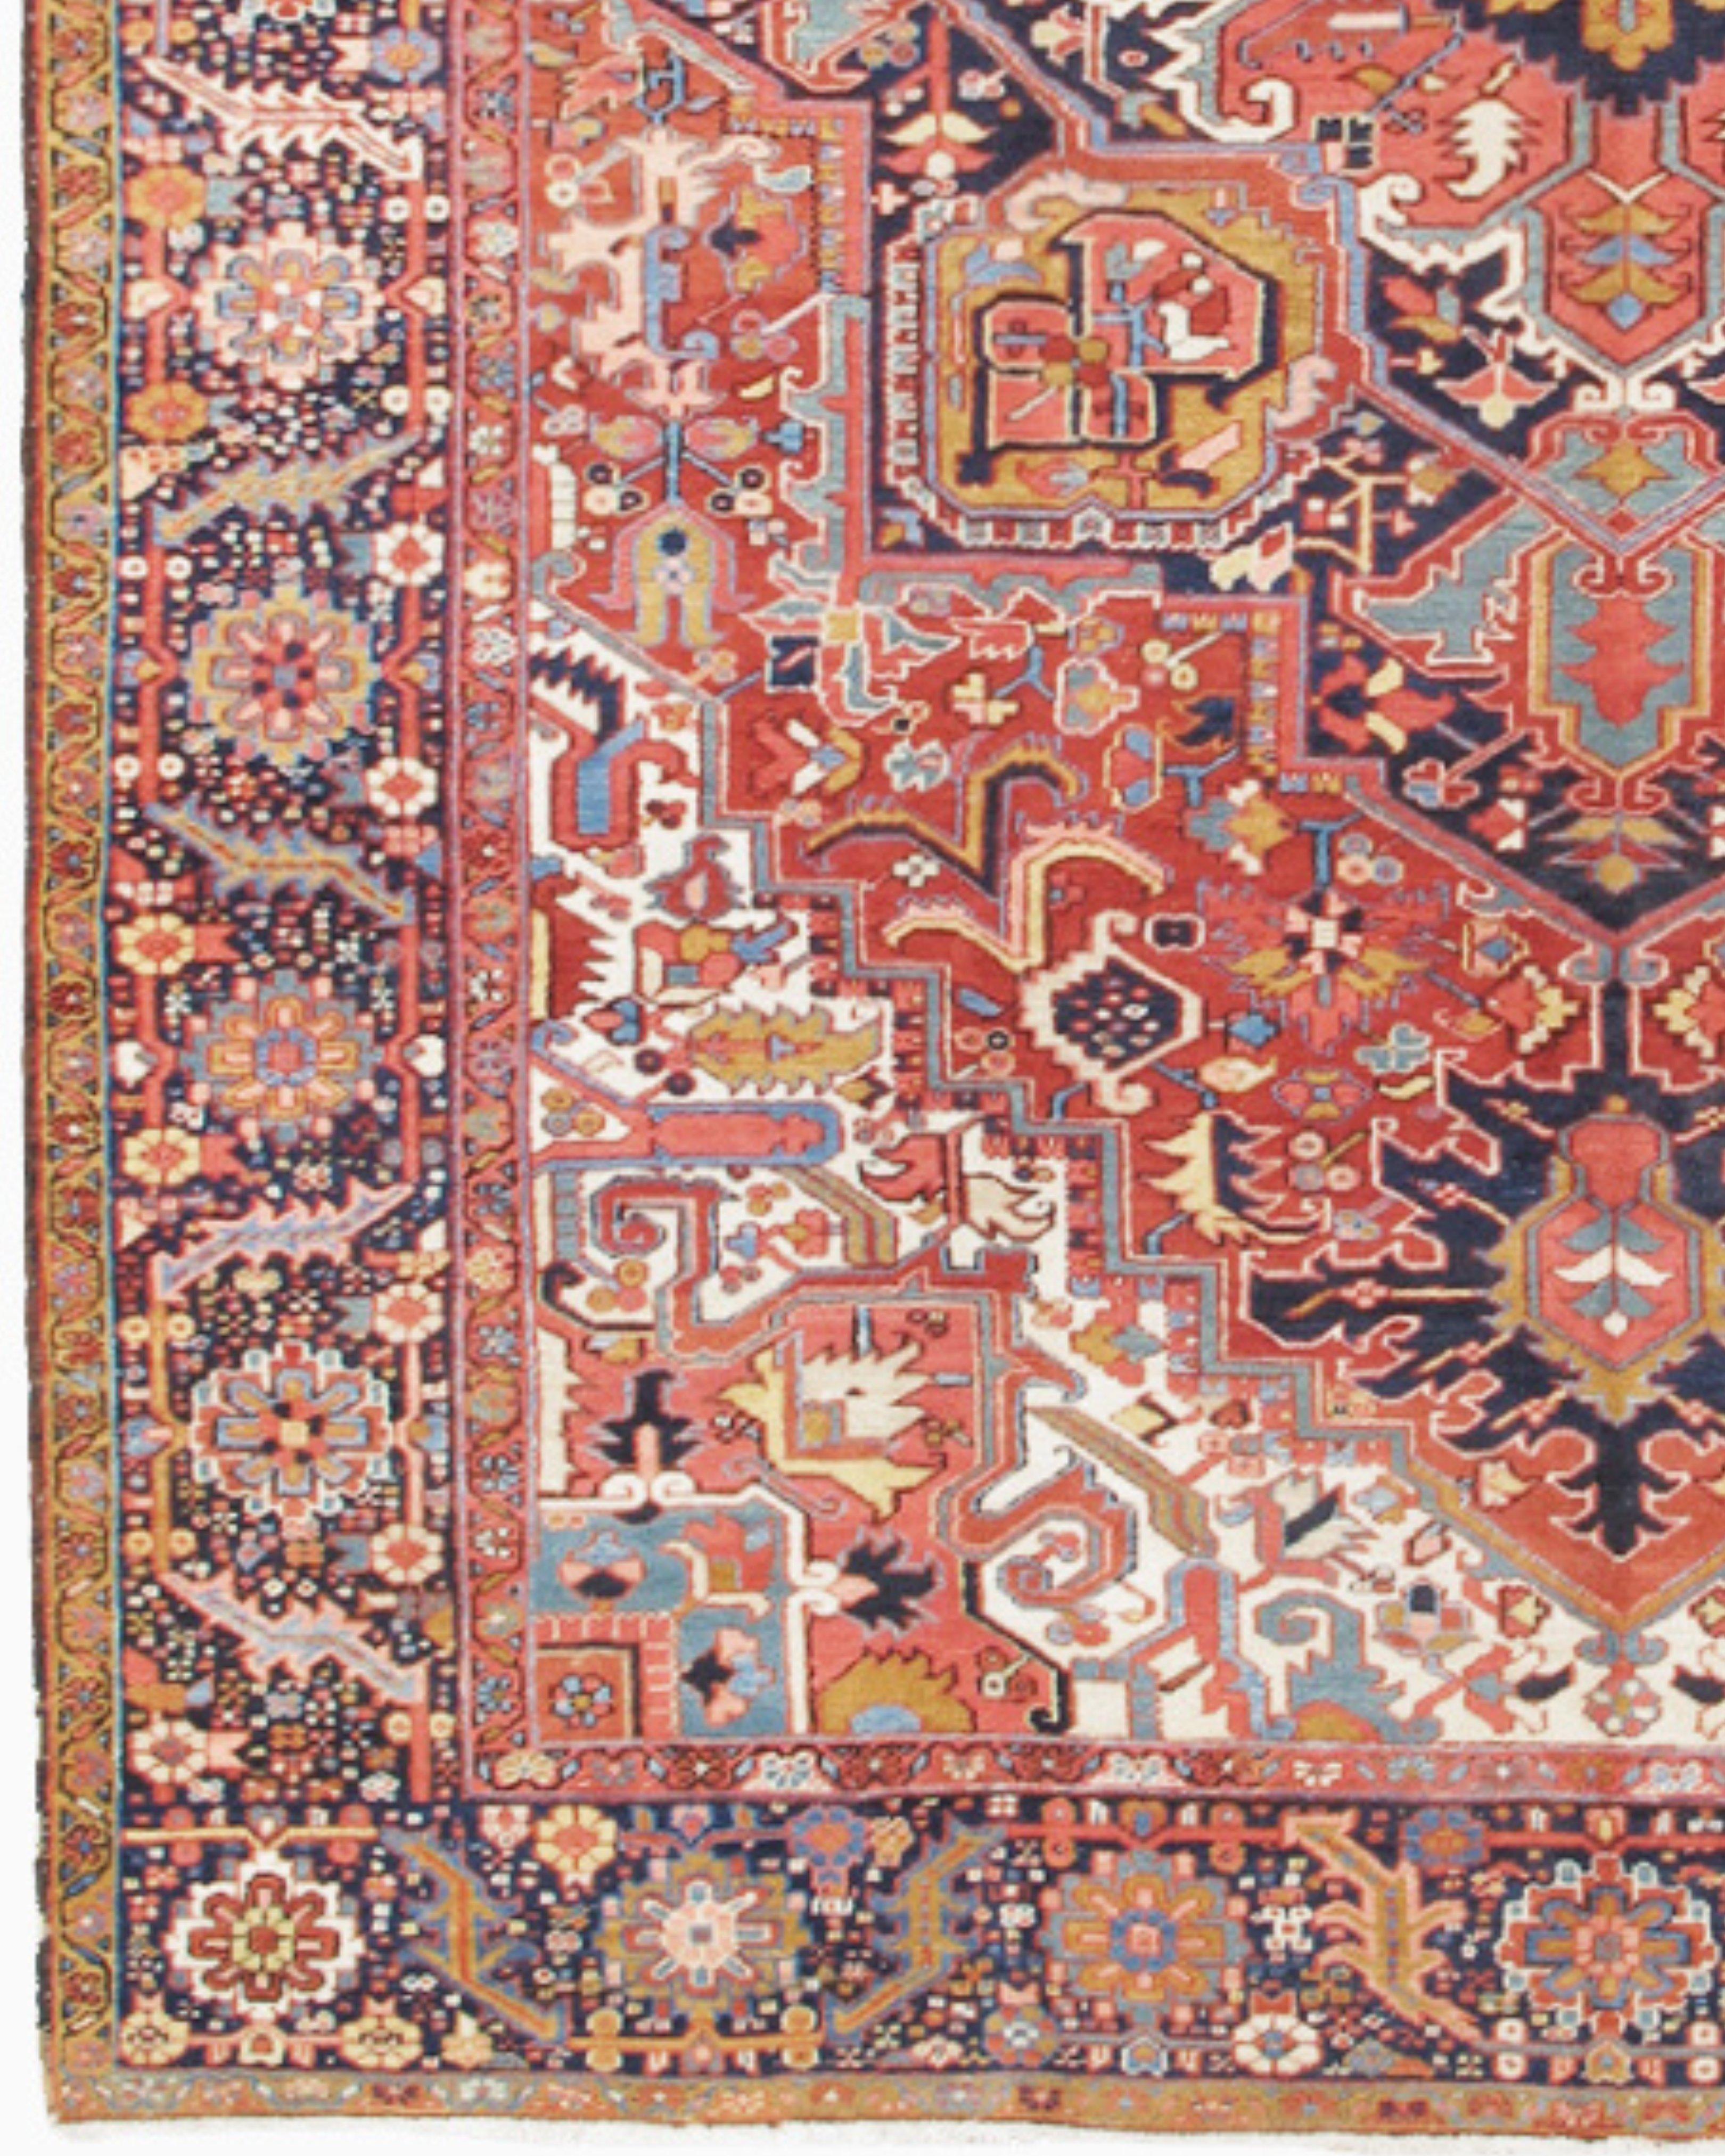 Heriz Rug, Early 20th Century

Heriz rugs and carpets were woven in Northwest Persia starting in the Mid-19th century in response to a great increase in demand for rugs internationally. Prior to that, there were no rugs woven (in Persia) for export